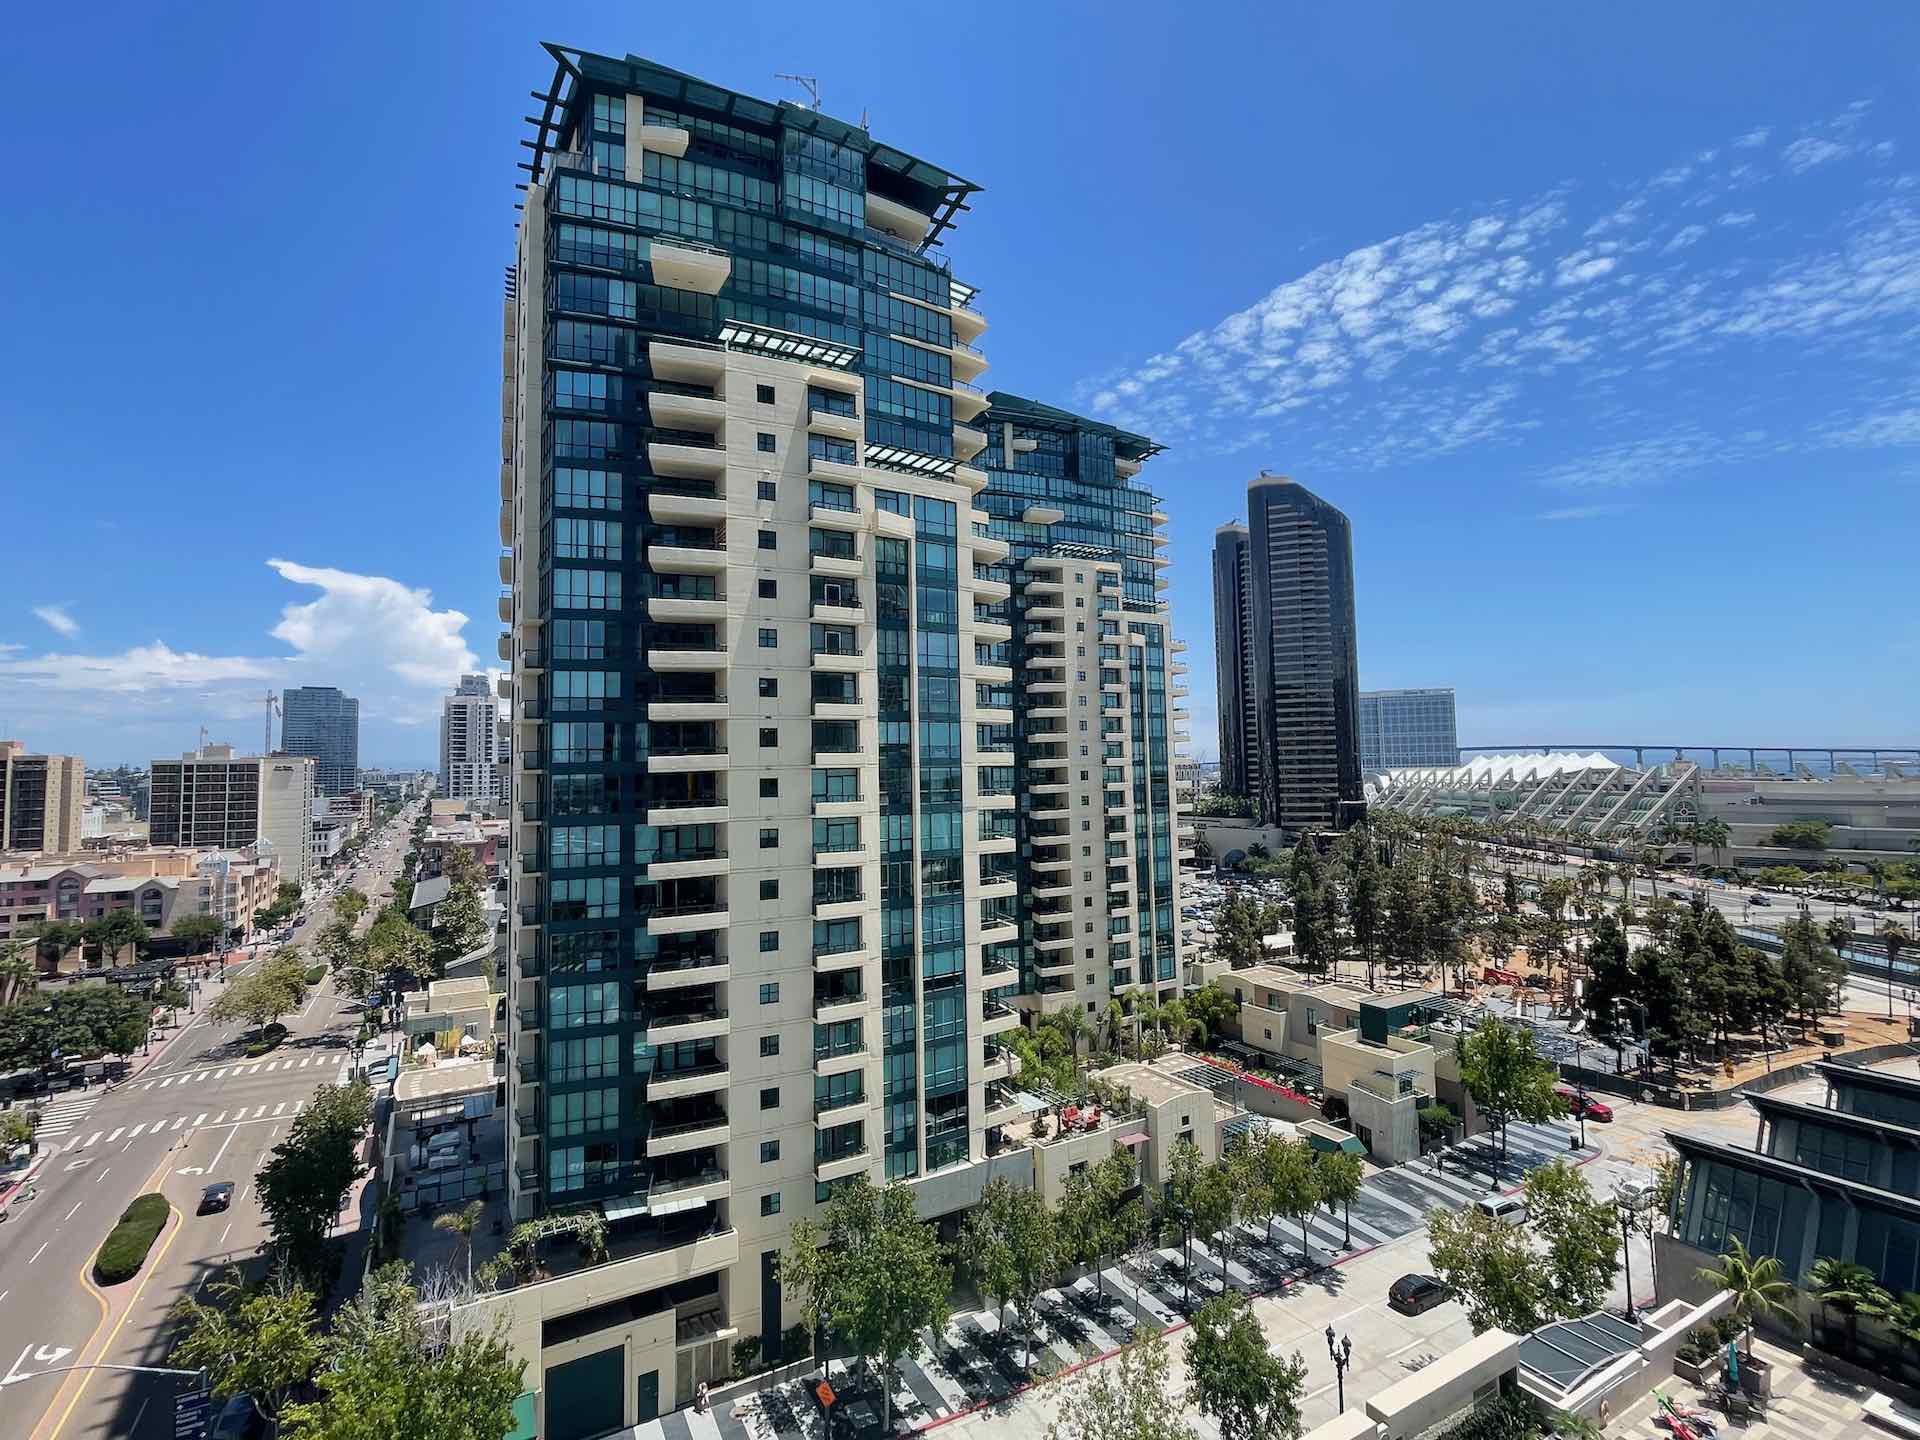 Horizons condos by BOSA in downtown San Diego